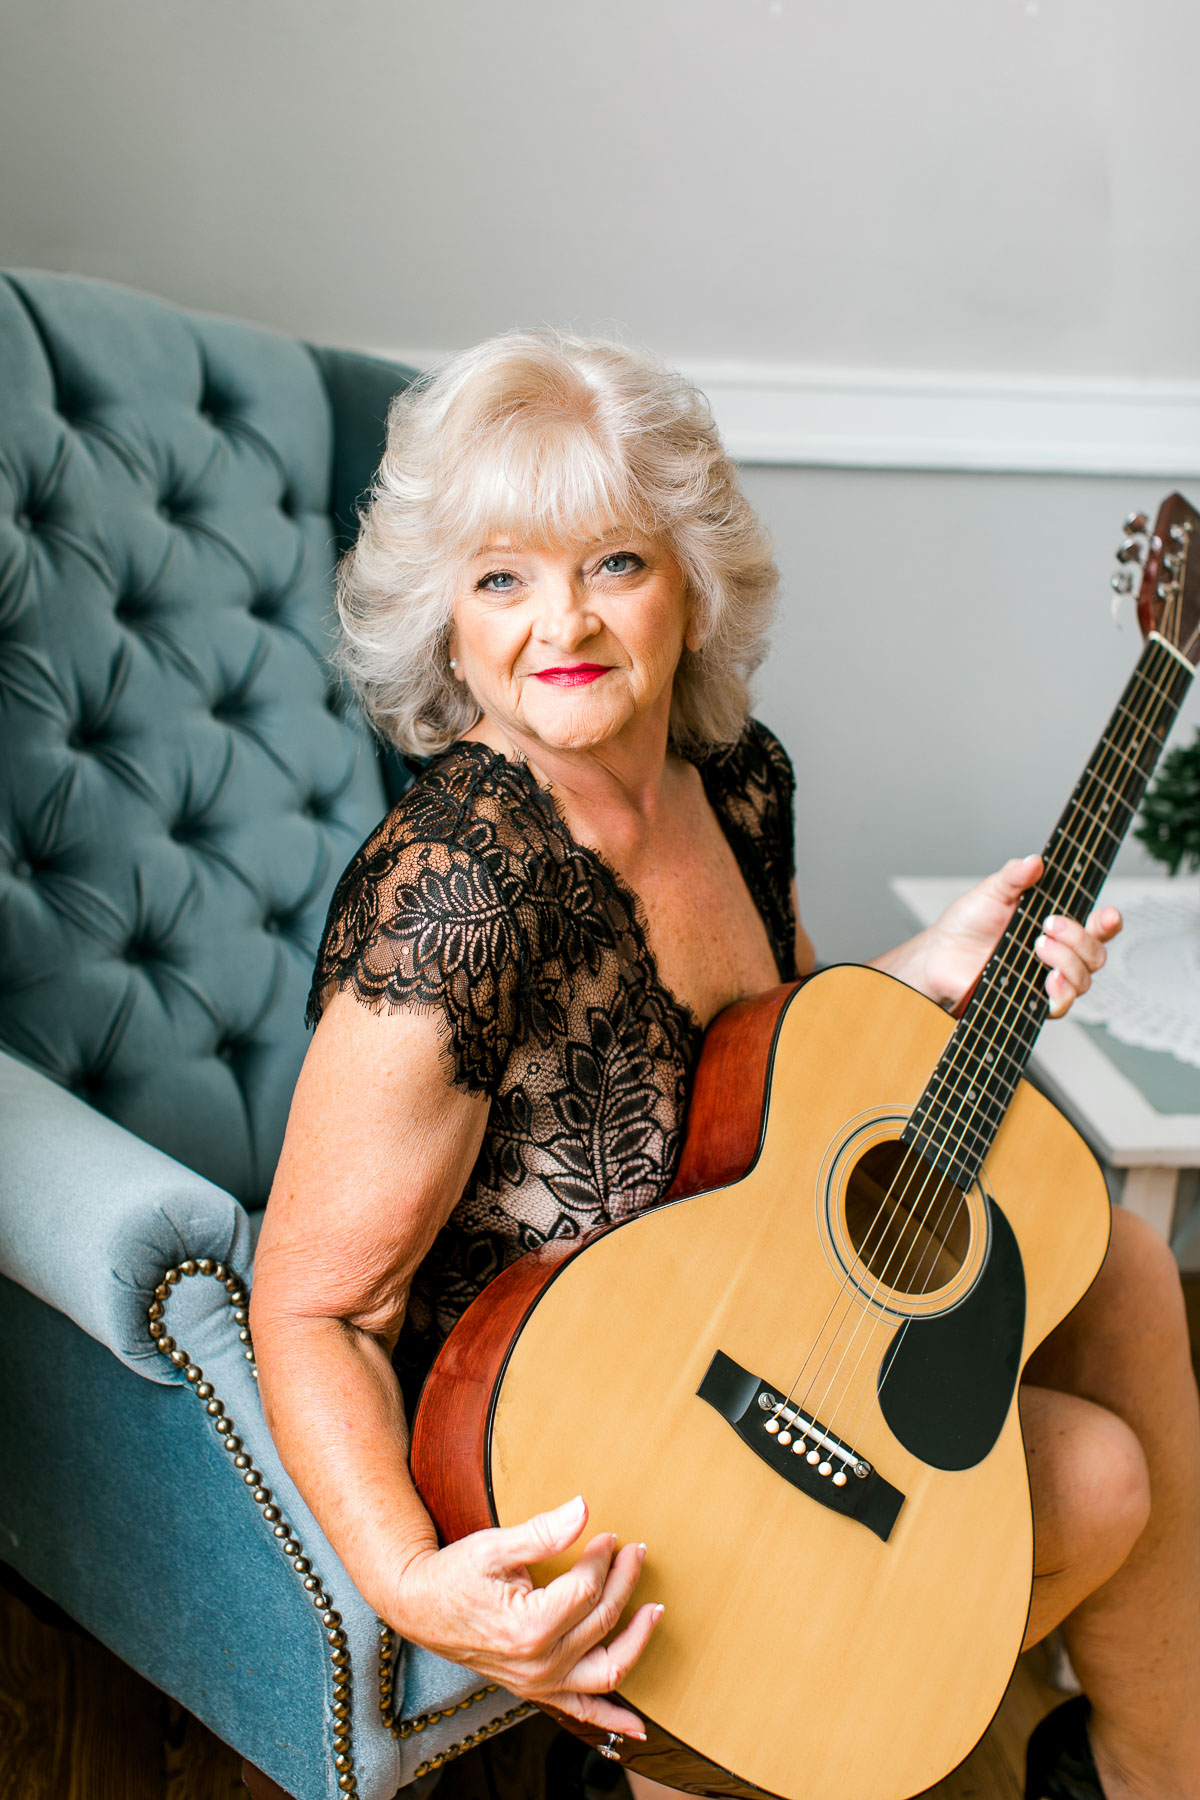 Boudoir woman holding guitar while sitting in chair